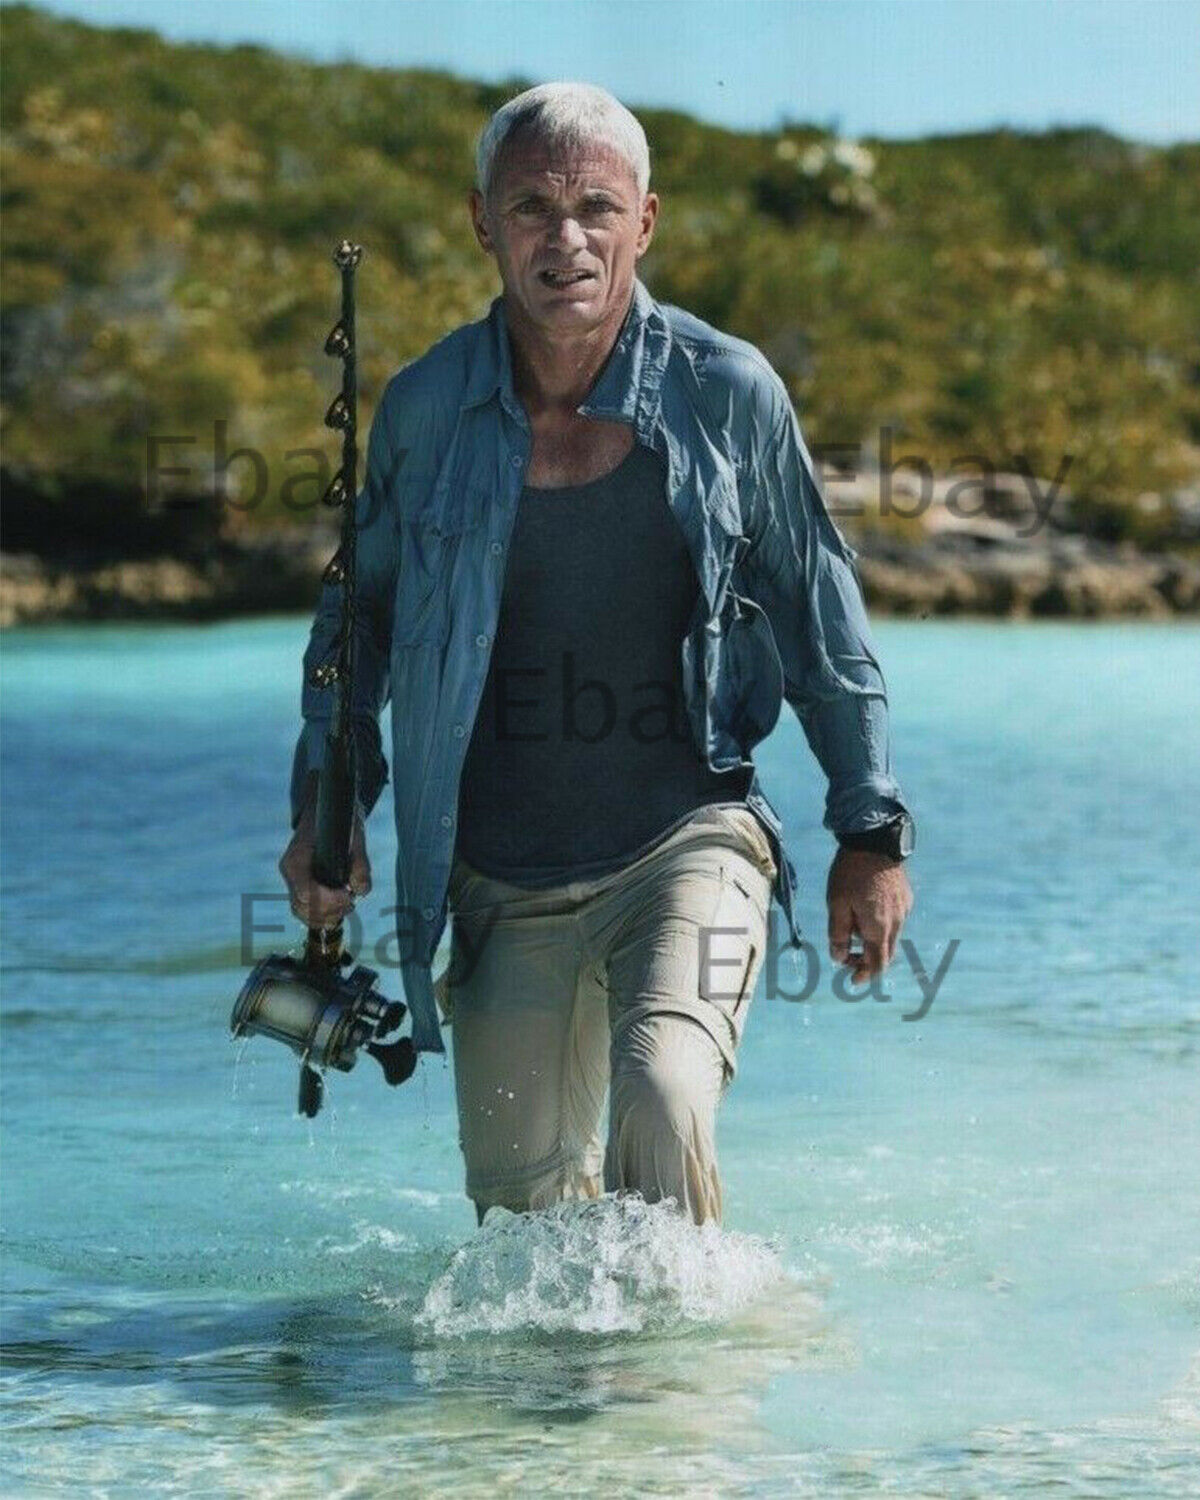 Jeremy Wade - TV Series River Monsters 8X10 Photo Reprint